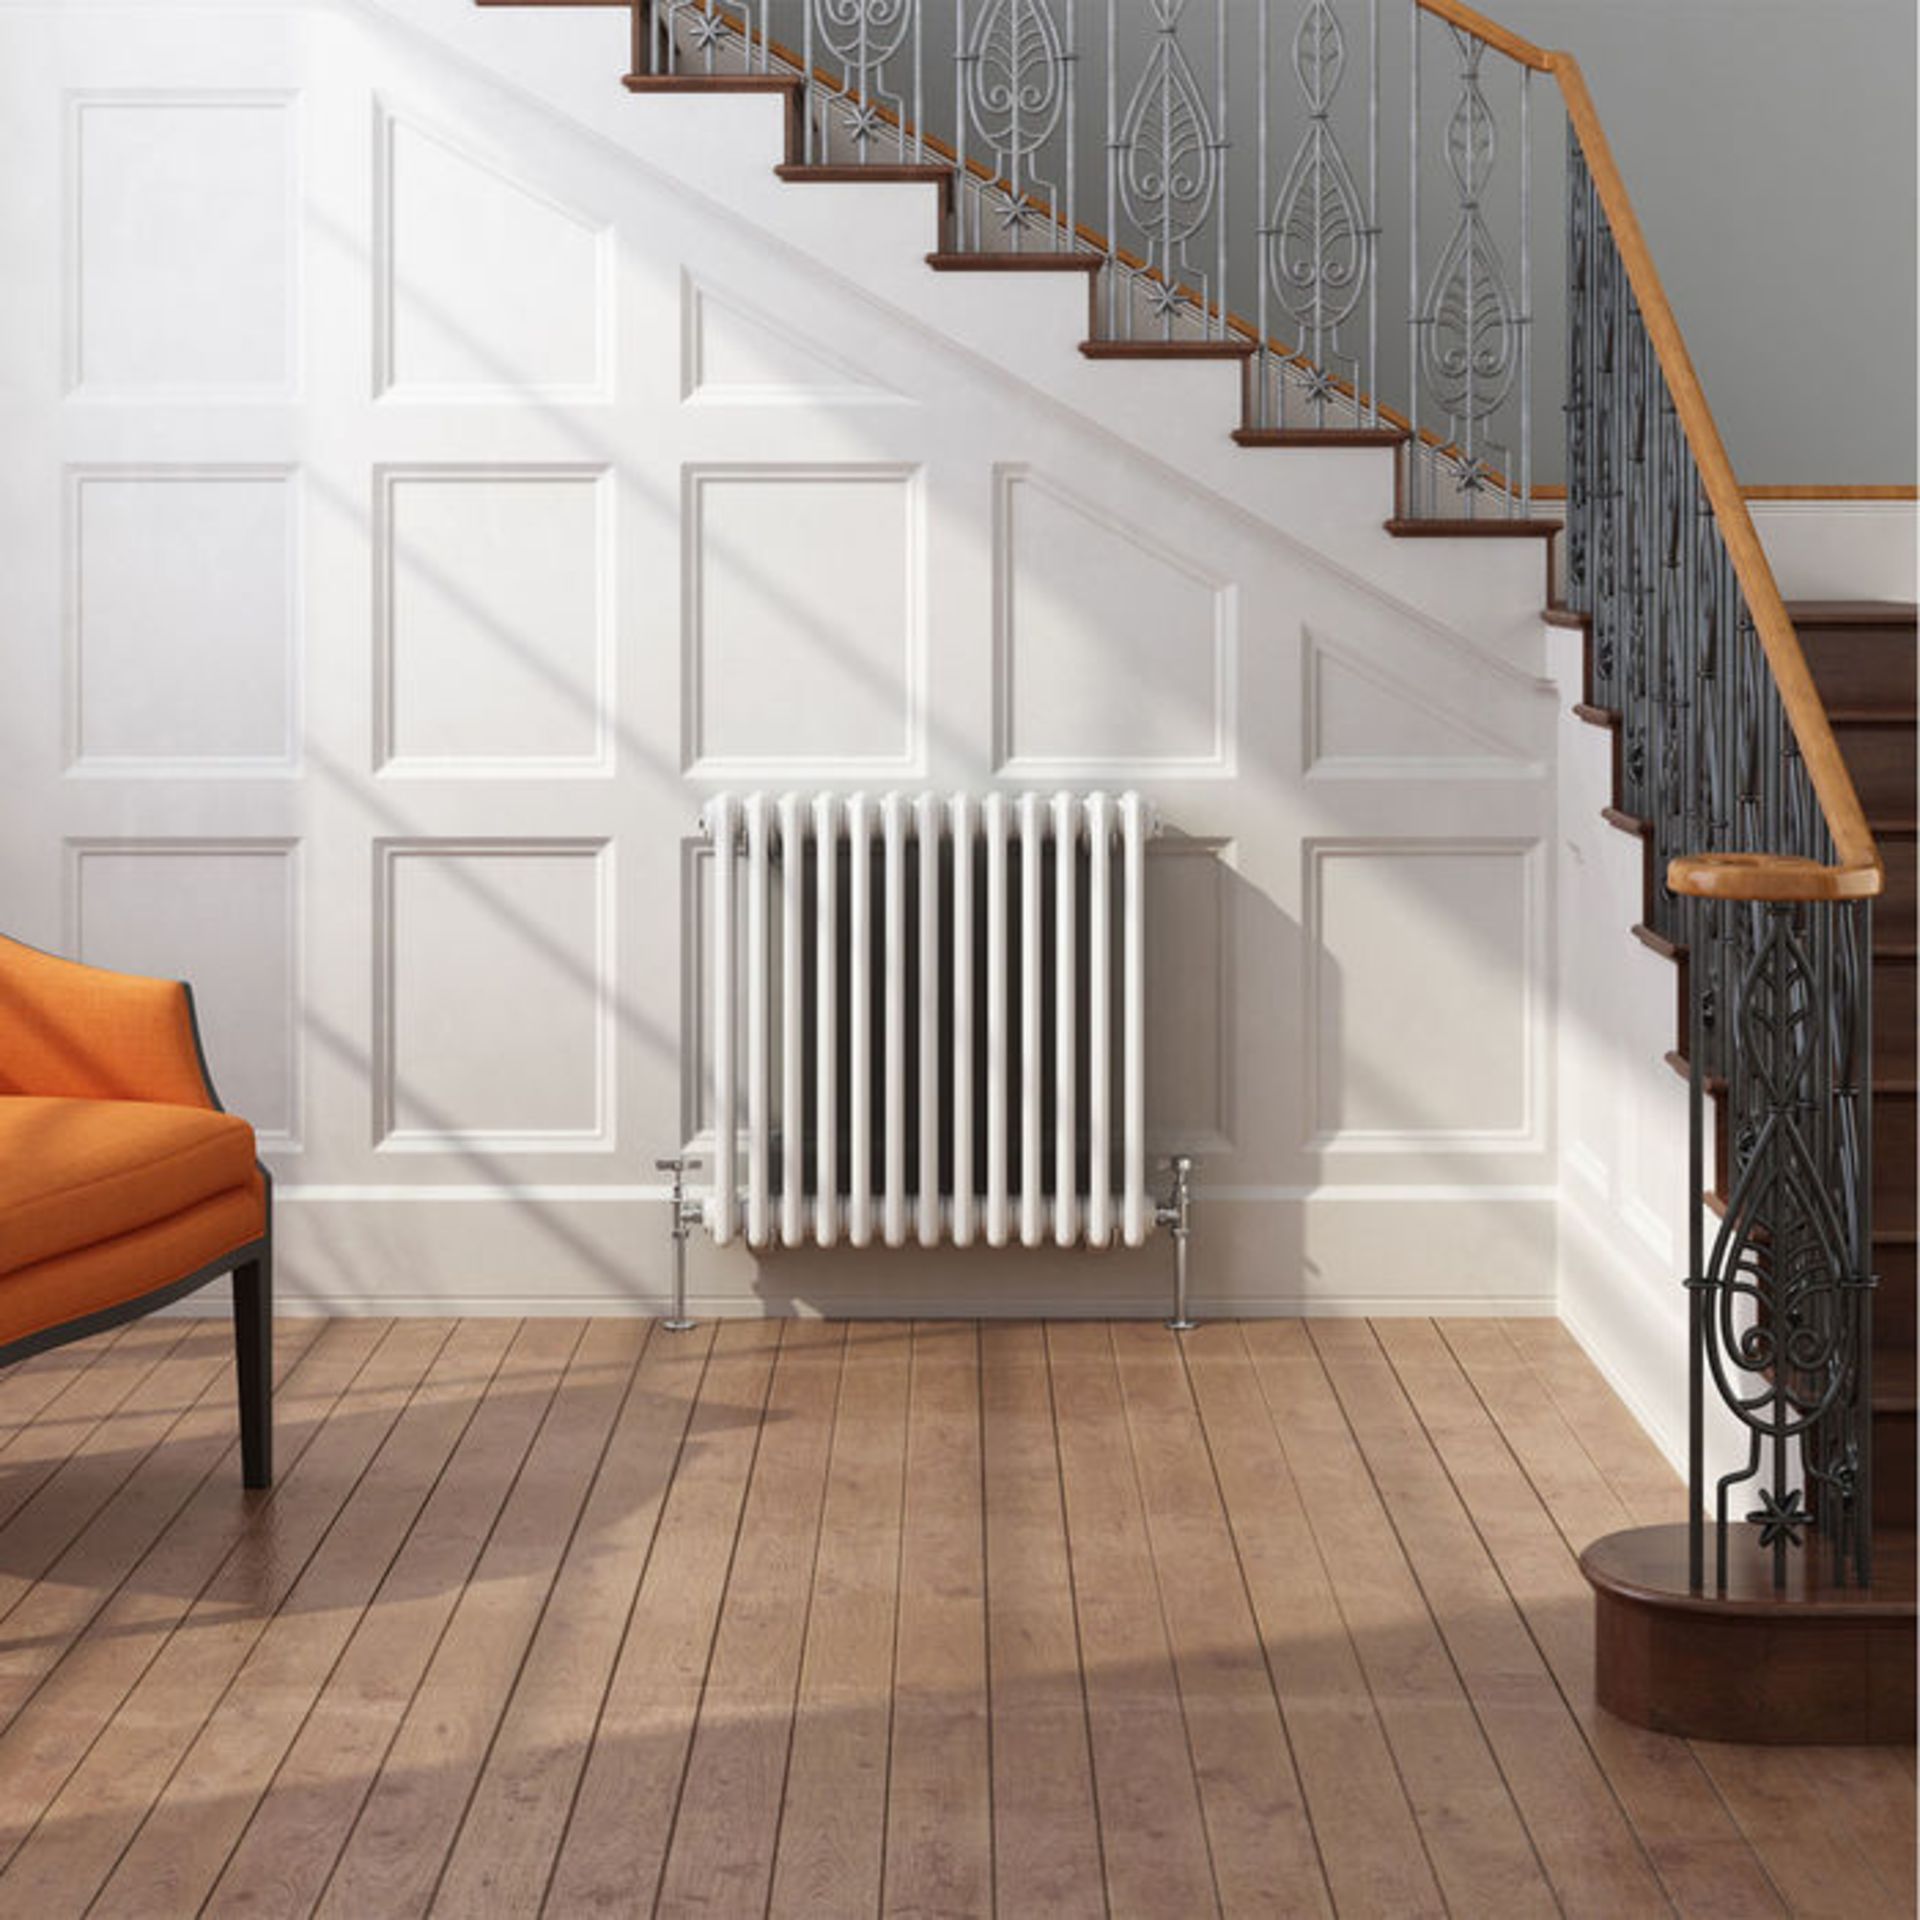 New & Boxed 600x820mm White Triple Panel Horizontal Colosseum Traditional Radiator. RRP £49... - Image 2 of 2